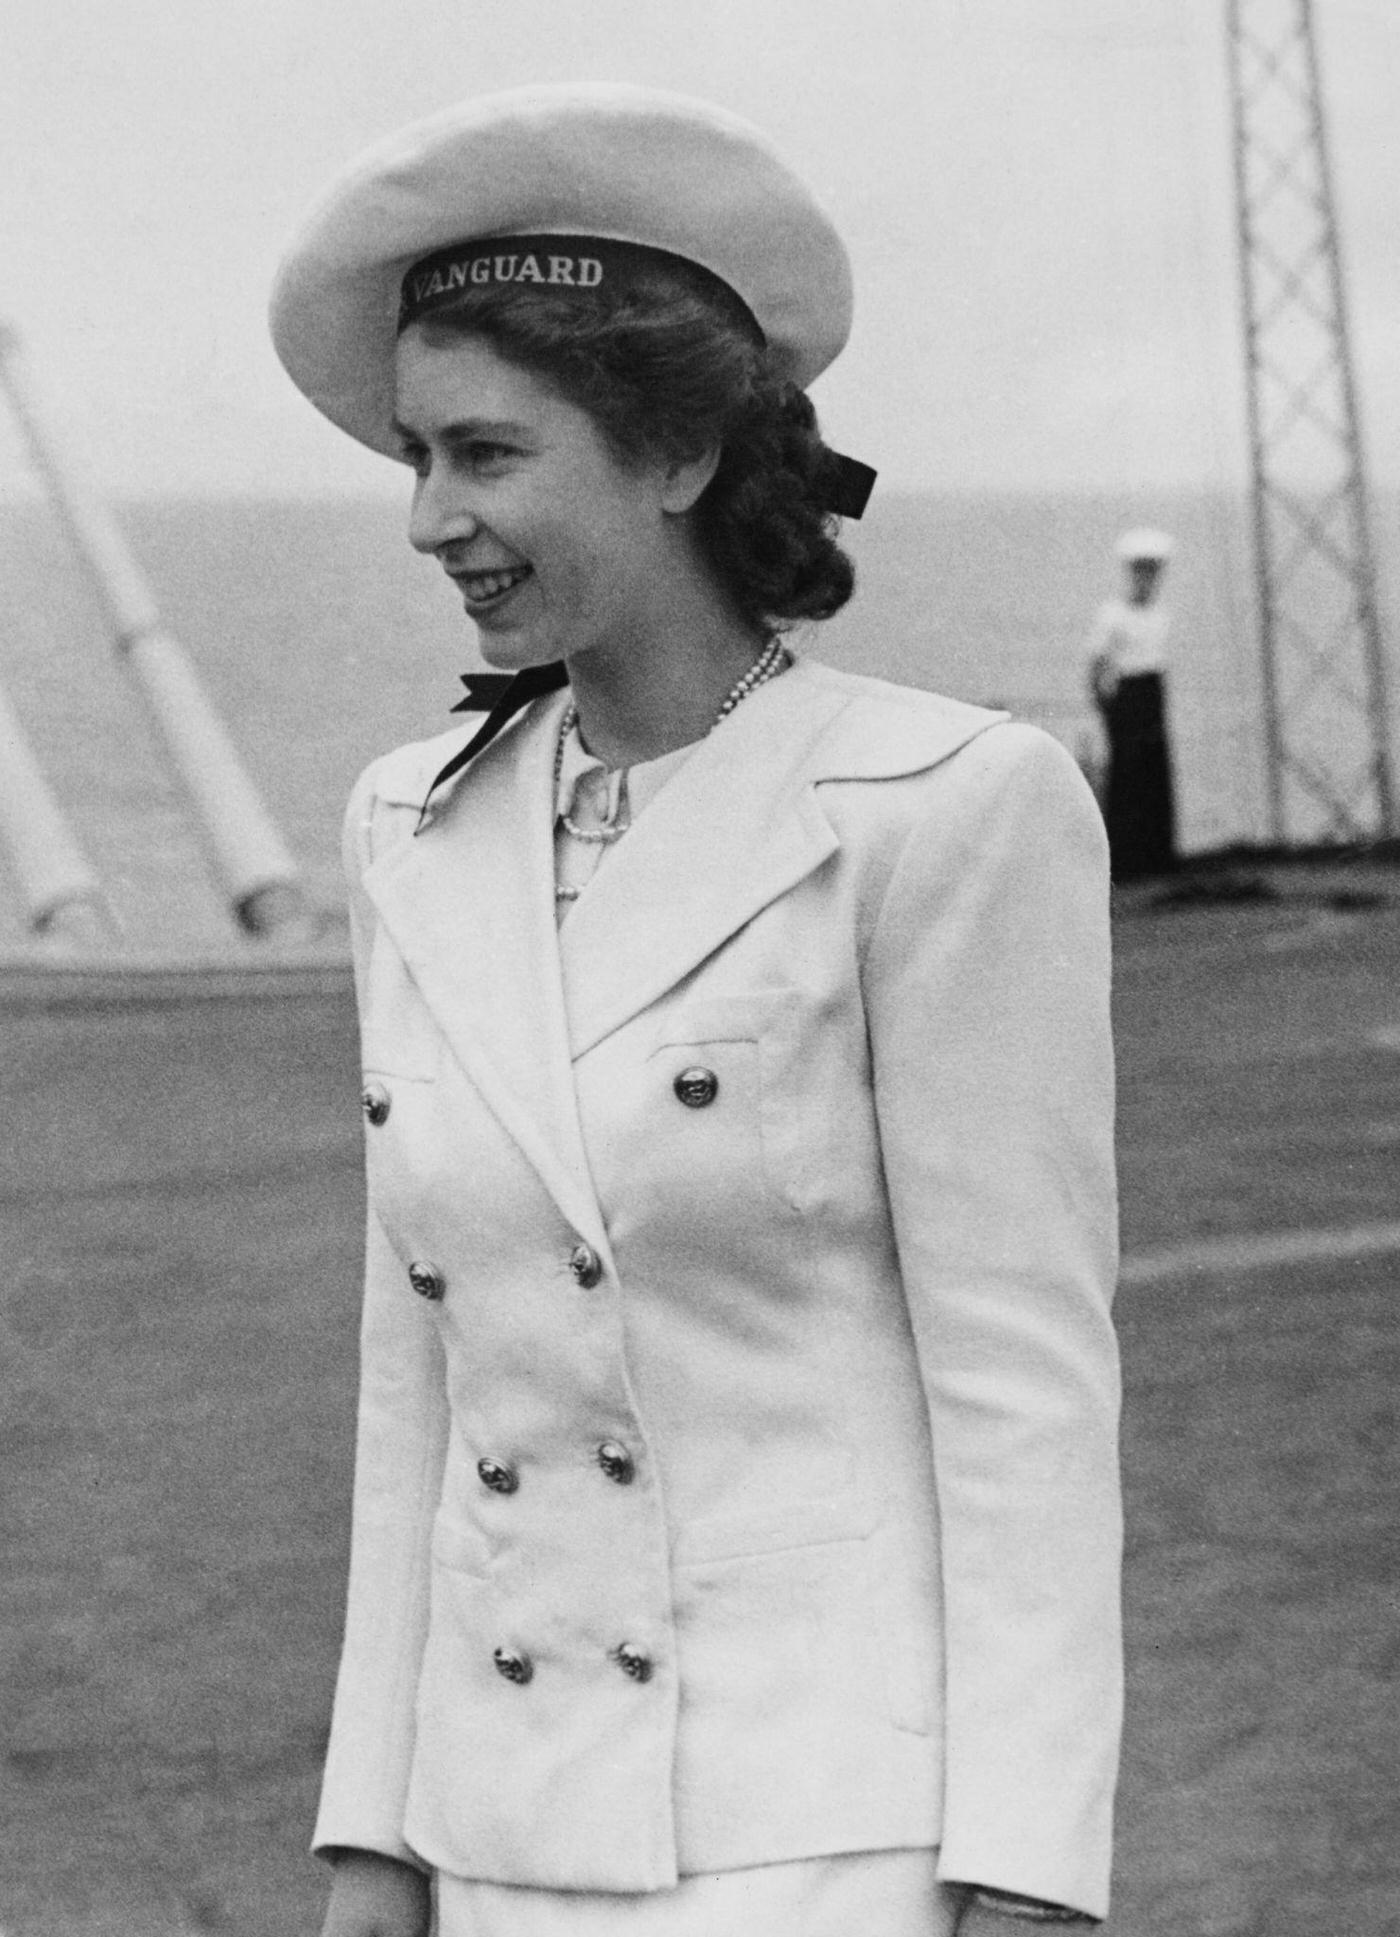 Princess Elizabeth on board the Royal Navy aircraft carrier HMS Implacable during a visit by the royal family from HMS Vanguard, which is taking them to South Africa, 17 February 1947.